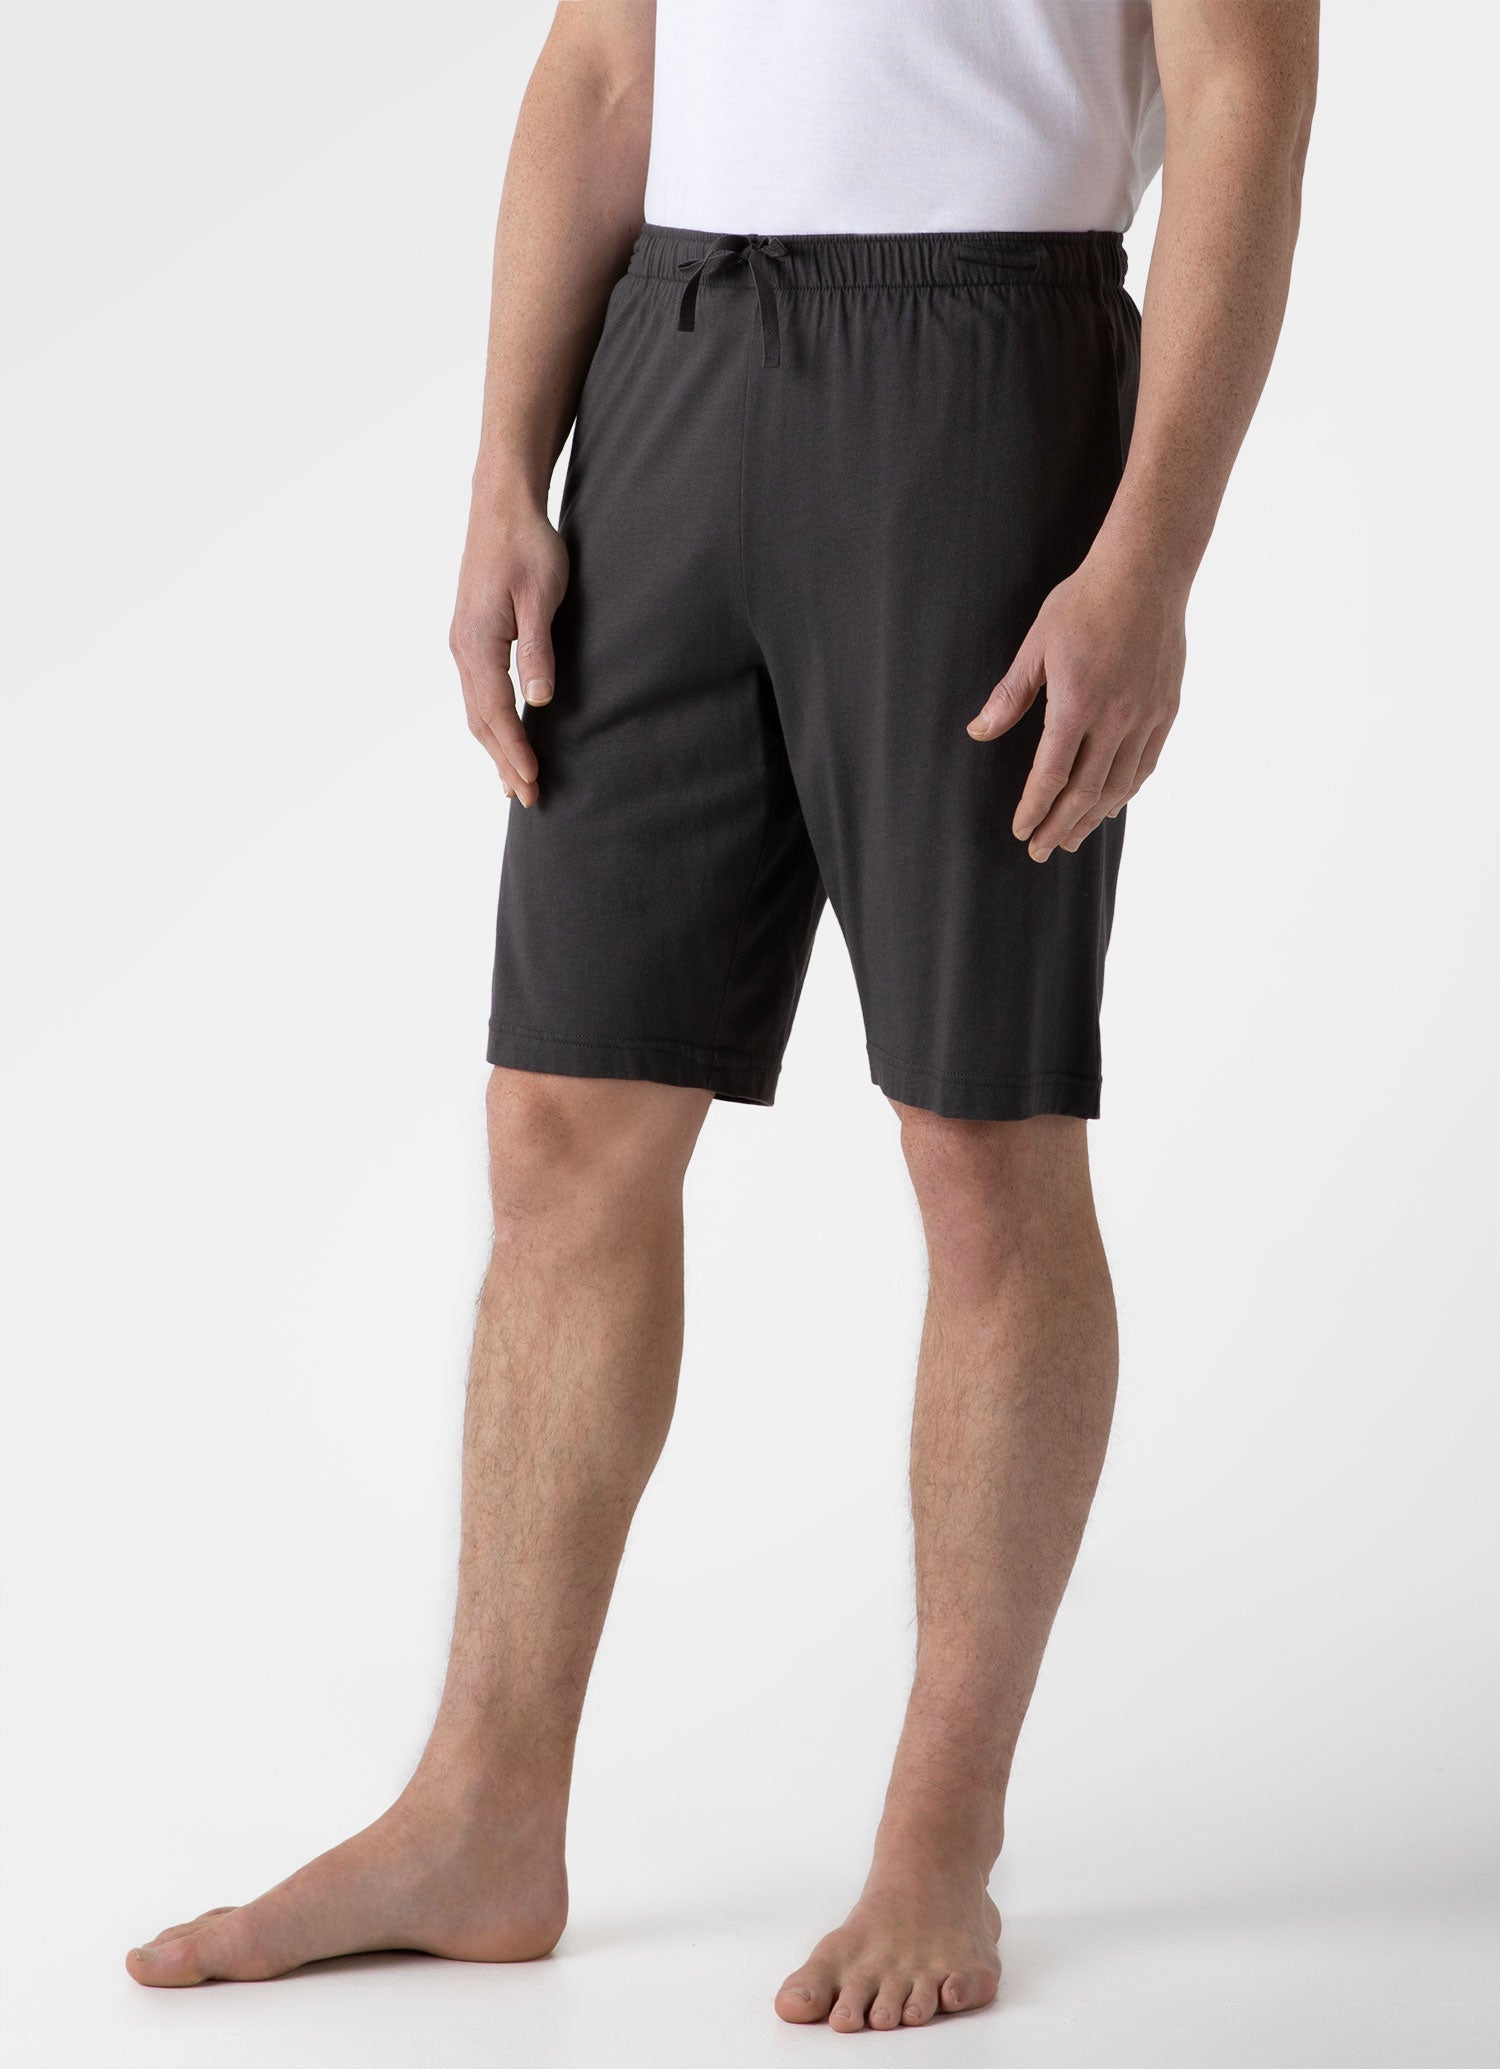 Men's Cotton Modal Lounge Shorts in Charcoal